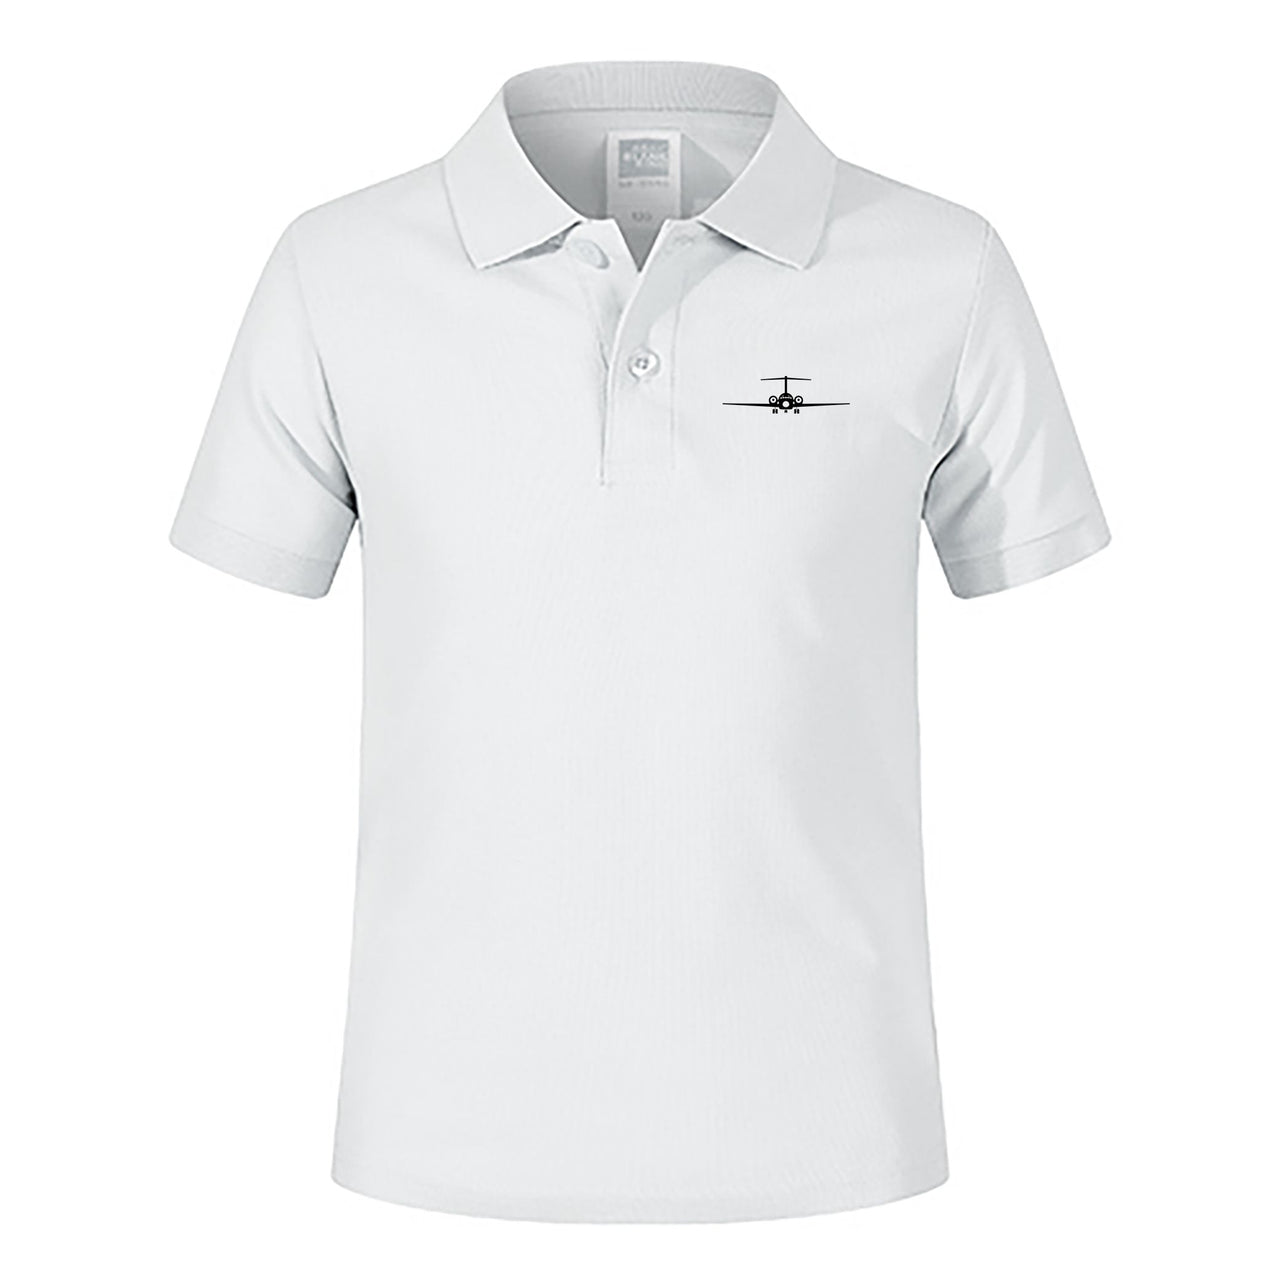 Boeing 717 Silhouette Designed Children Polo T-Shirts